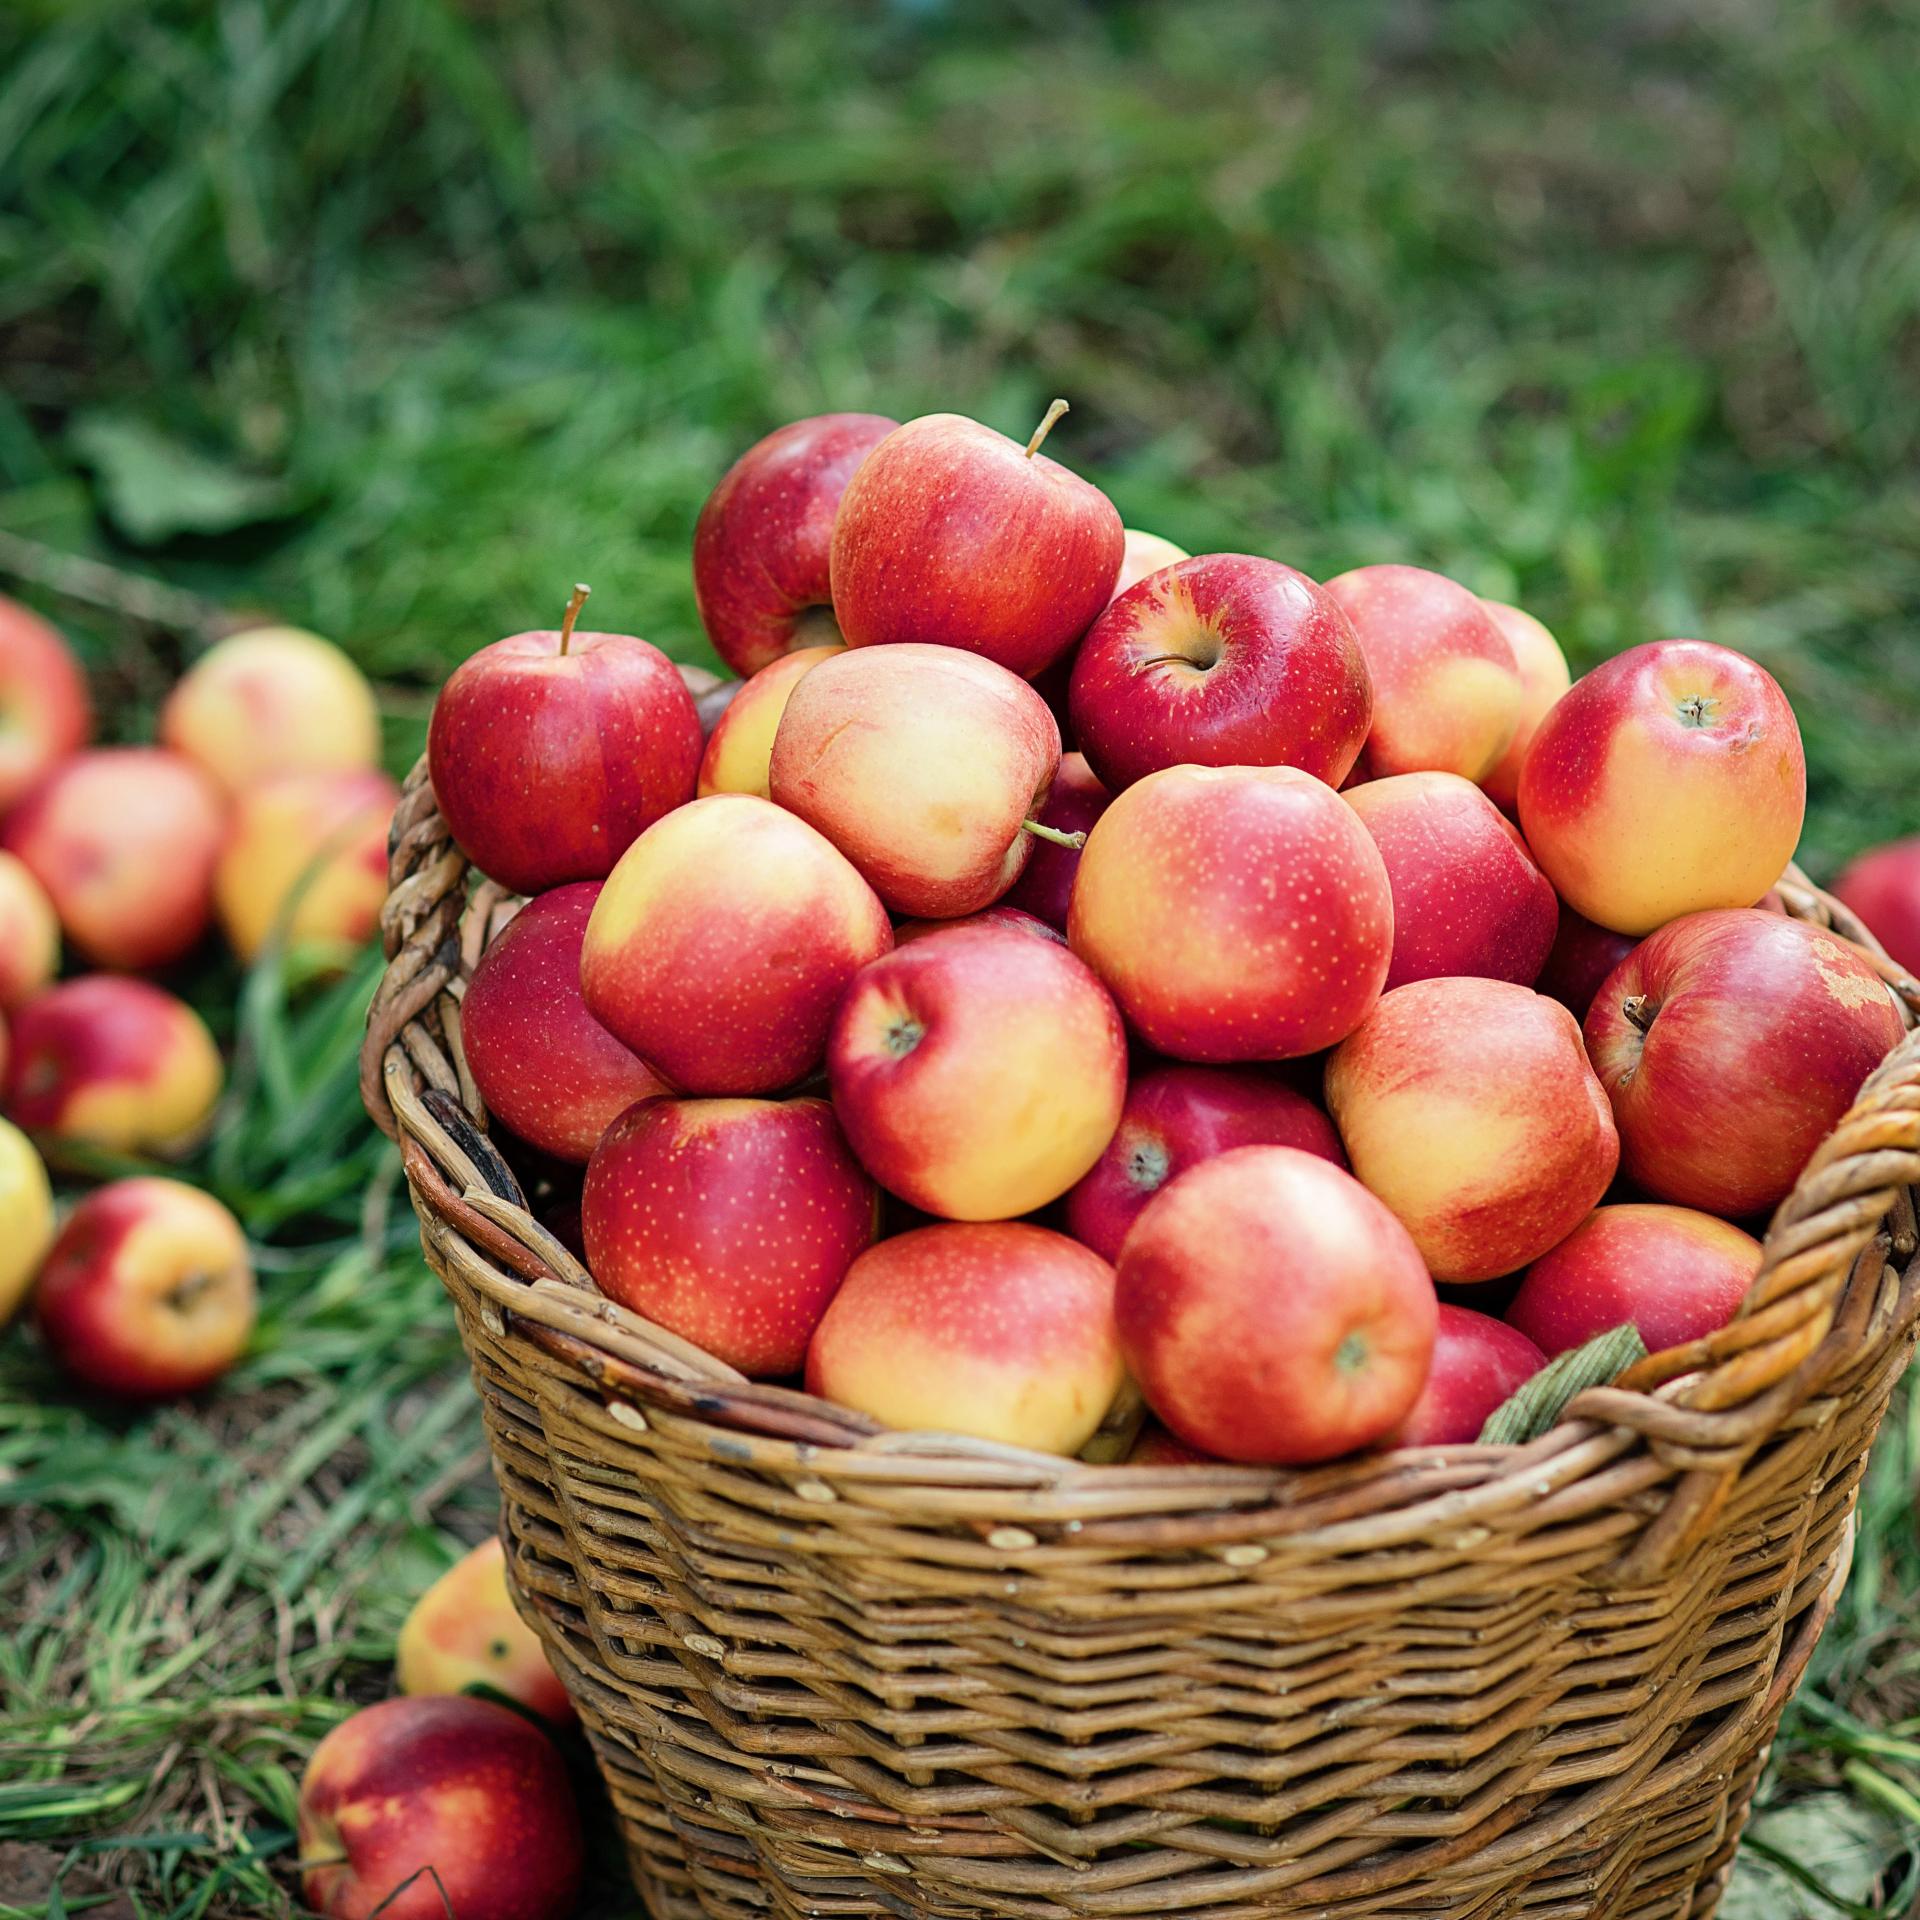 Apple harvest. Ripe red apples in the basket and in dark wooden crate on green grass on the green grass. Apple picking